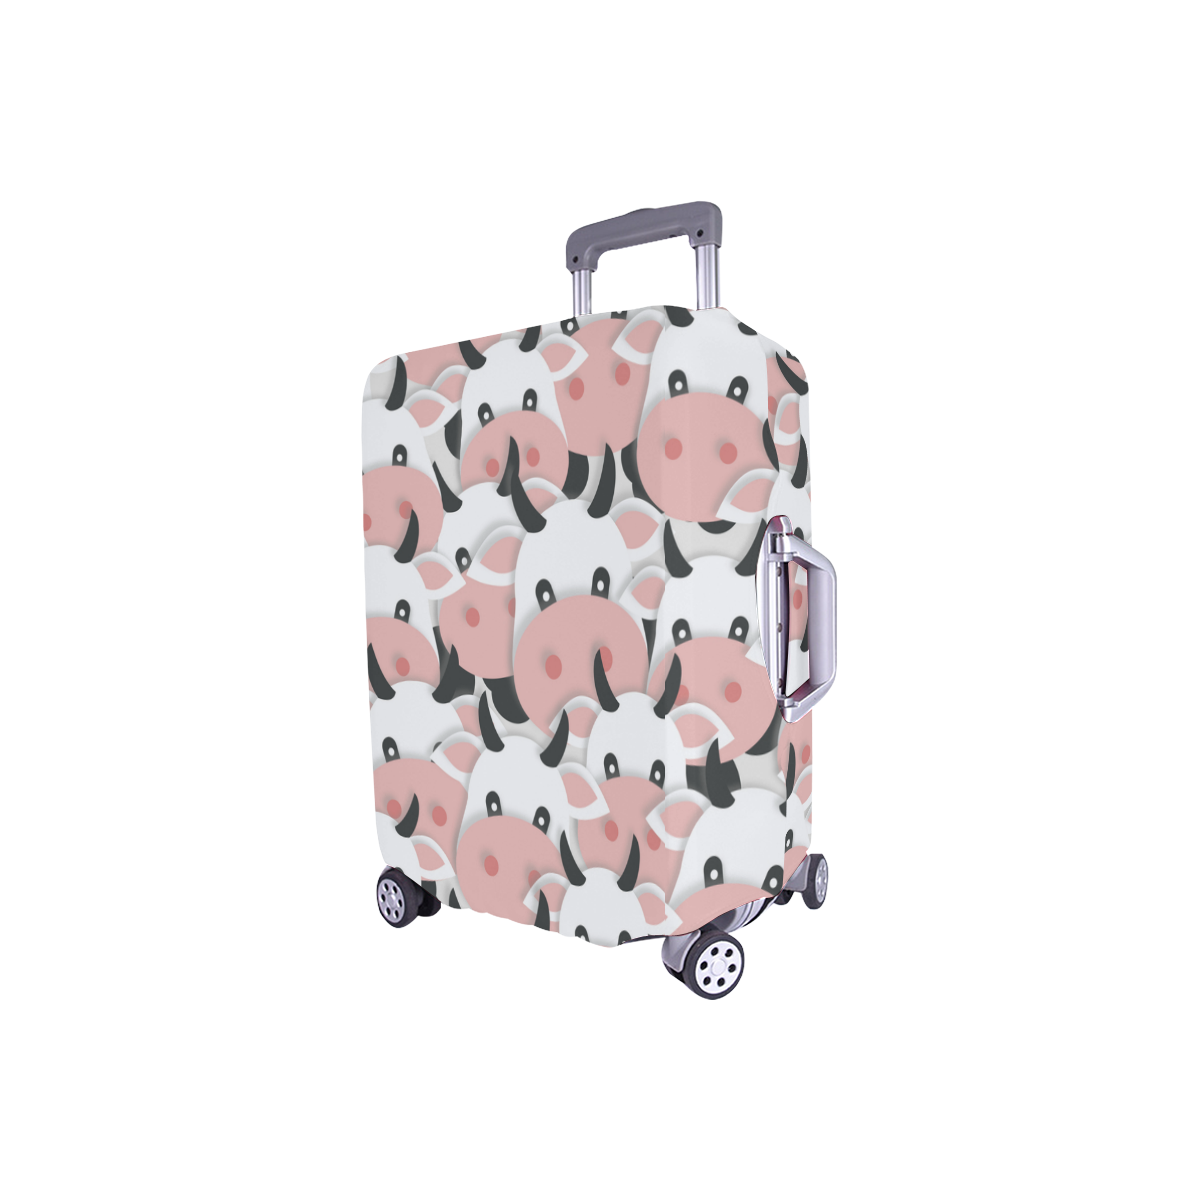 Herd of Cartoon Cows Luggage Cover/Small 18"-21"